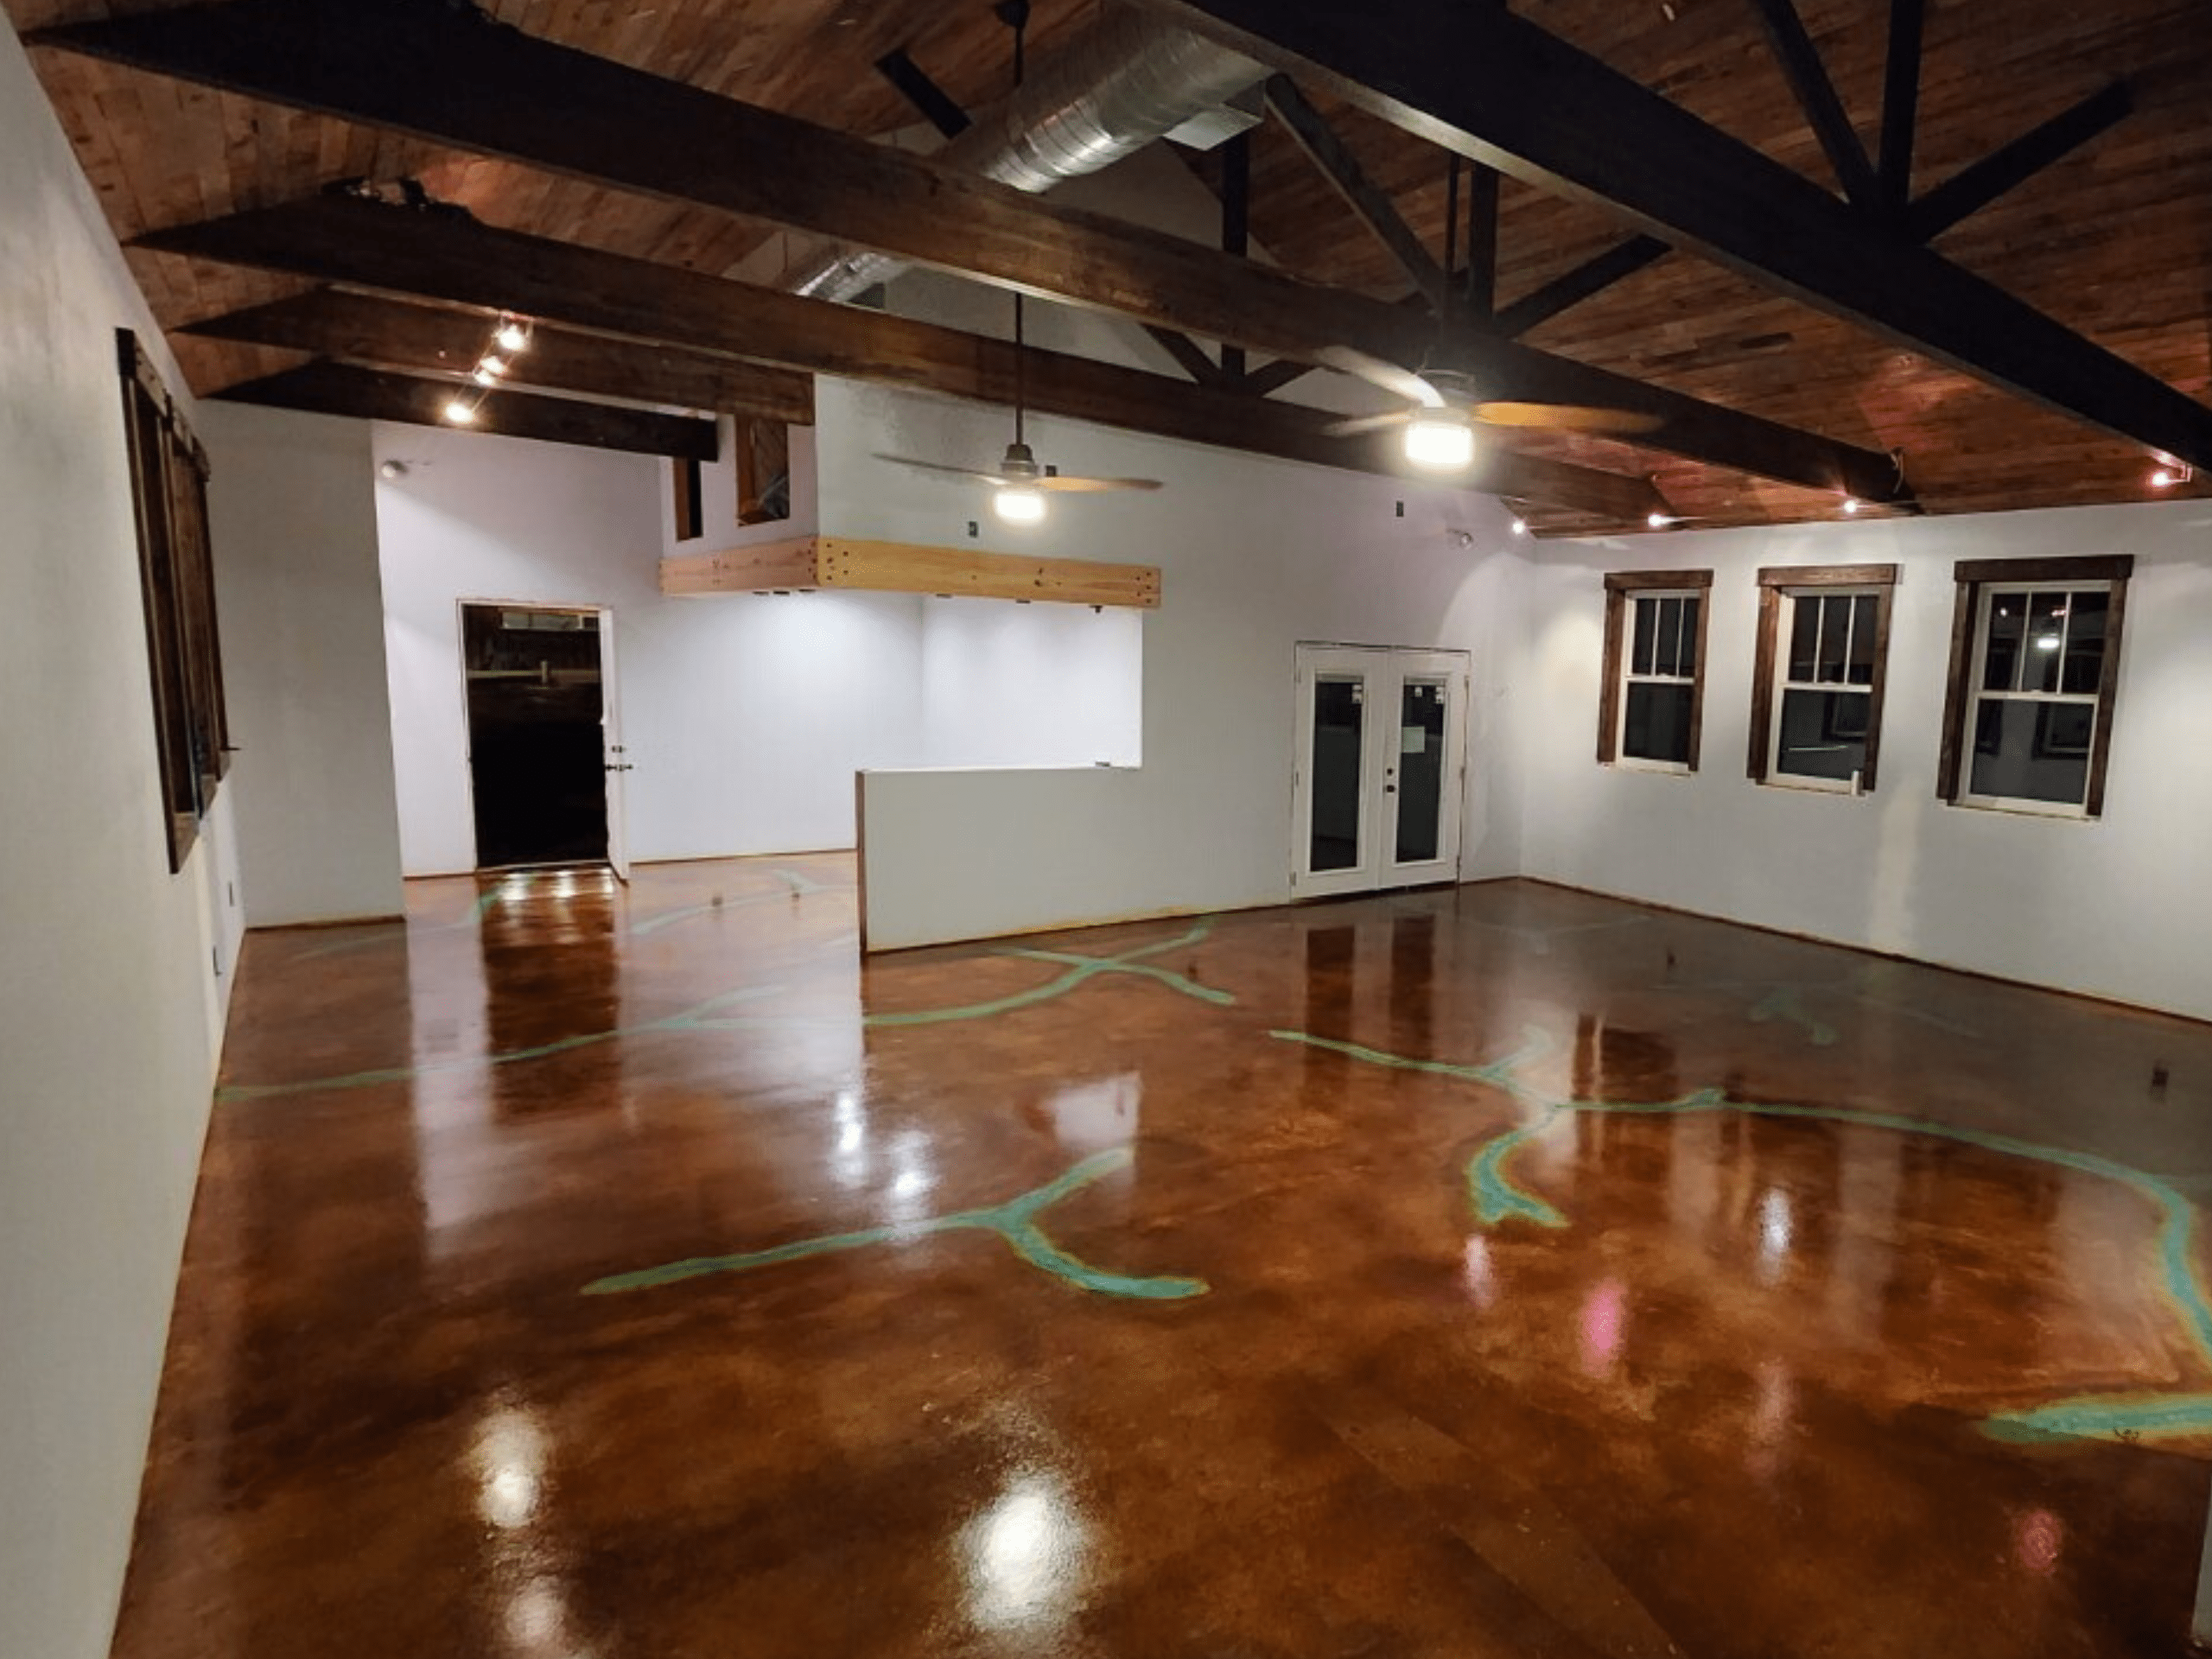 A spacious residential interior with high ceilings and exposed beams, featuring a fully stained concrete floor with intricate patterns in Azure Blue, Black, and Cola